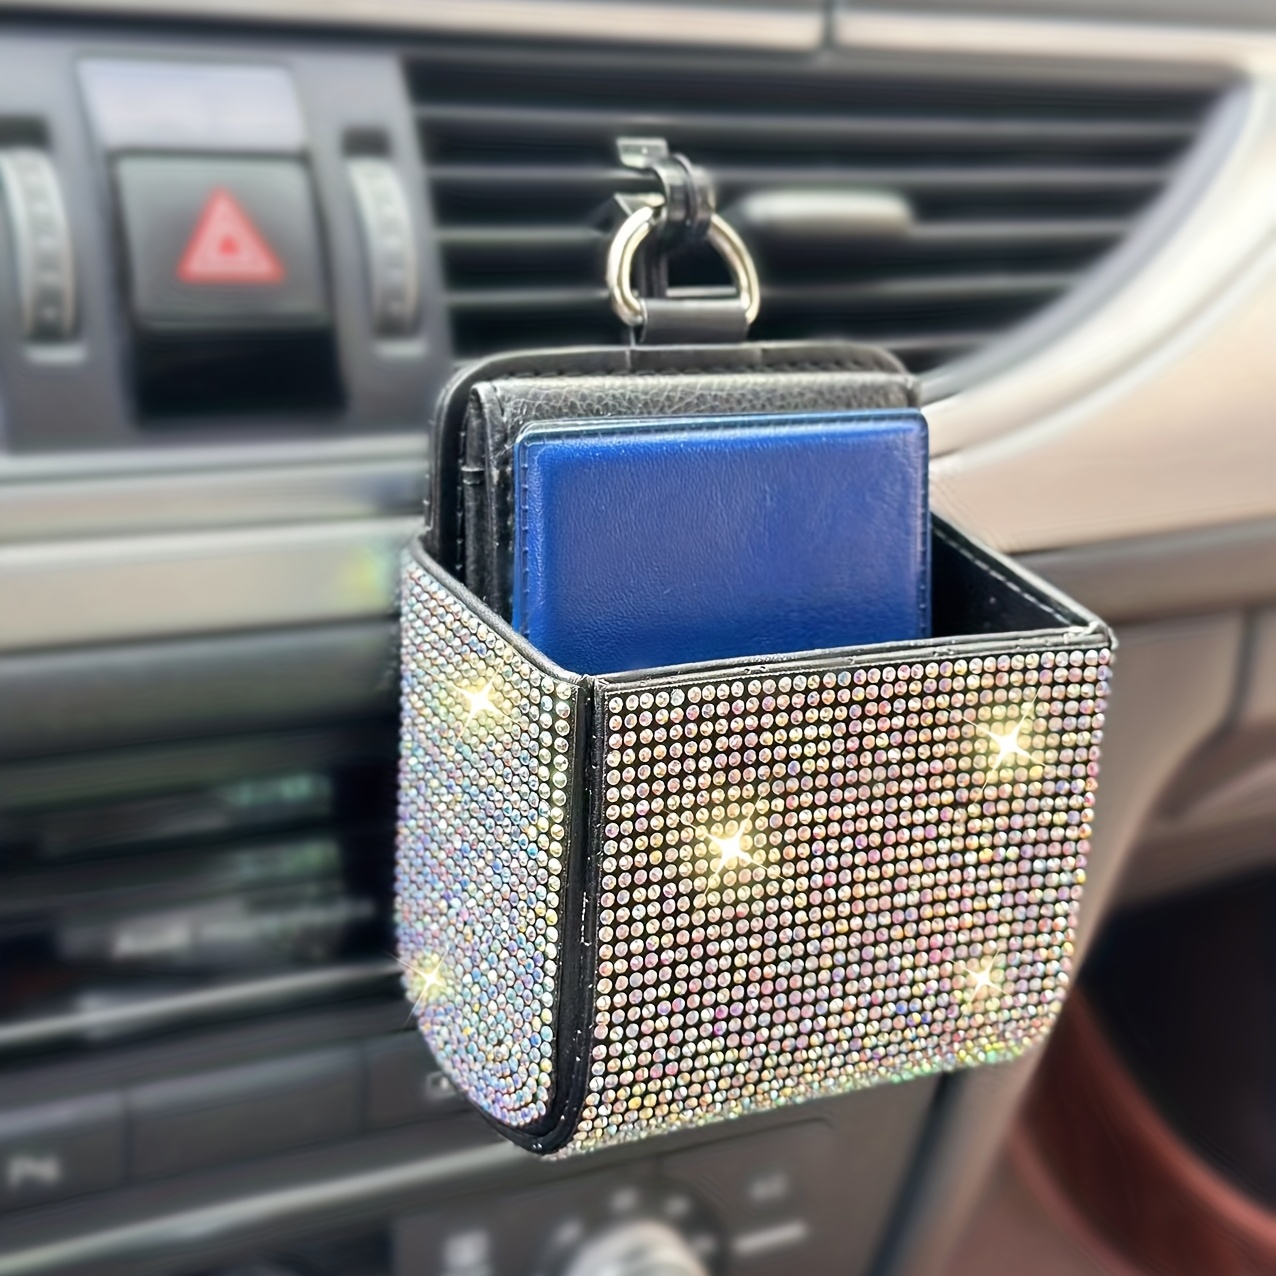 

Car Interior Storage Bag: Keep Your Phone, Documents & Supplies Organized & Secure!